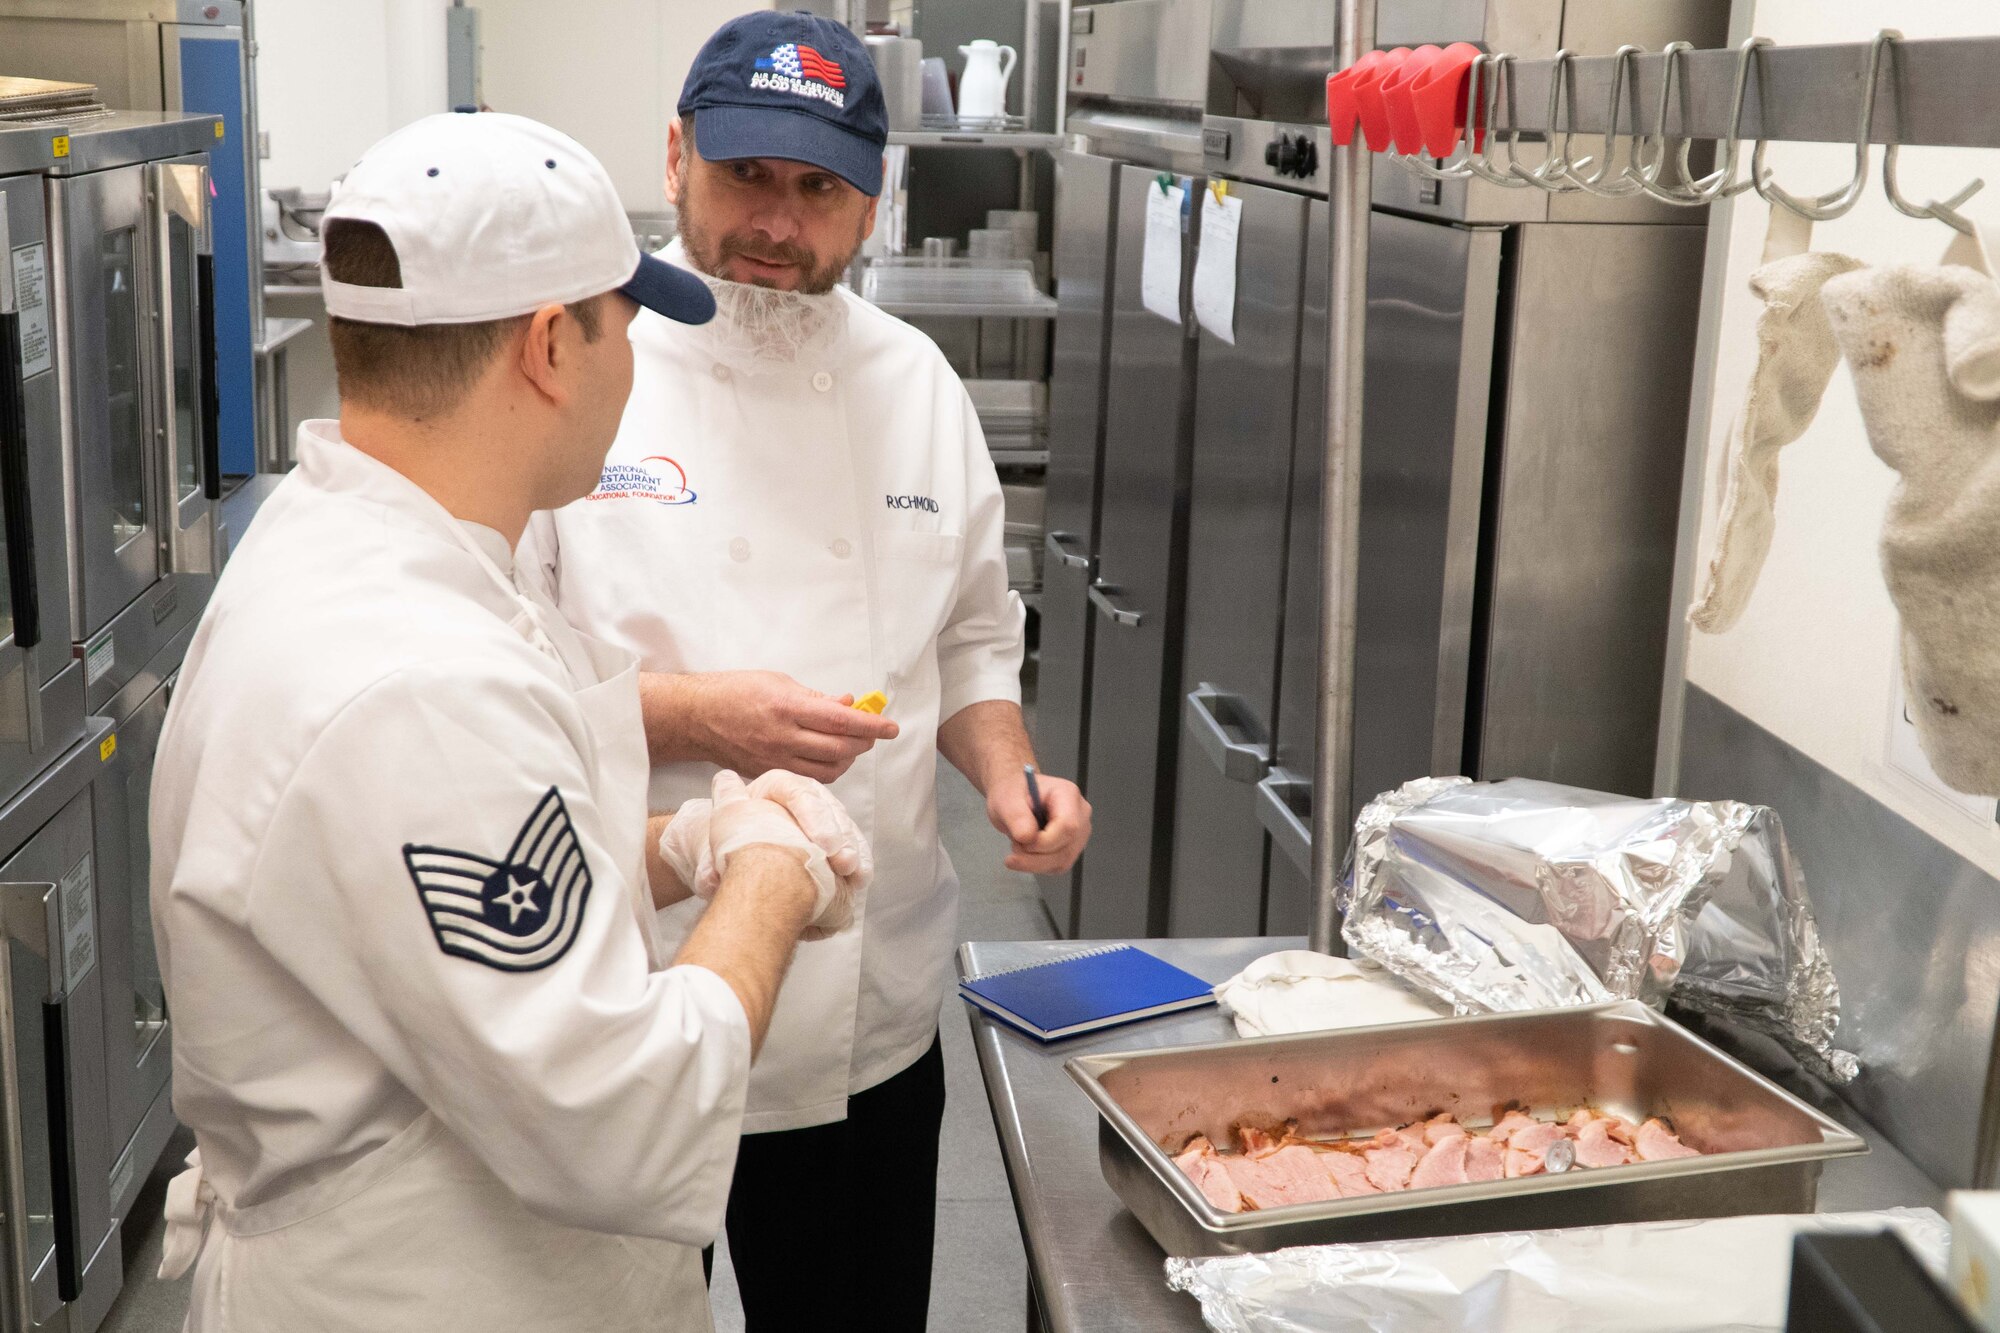 The 139th Service Flight evaluated for food service award